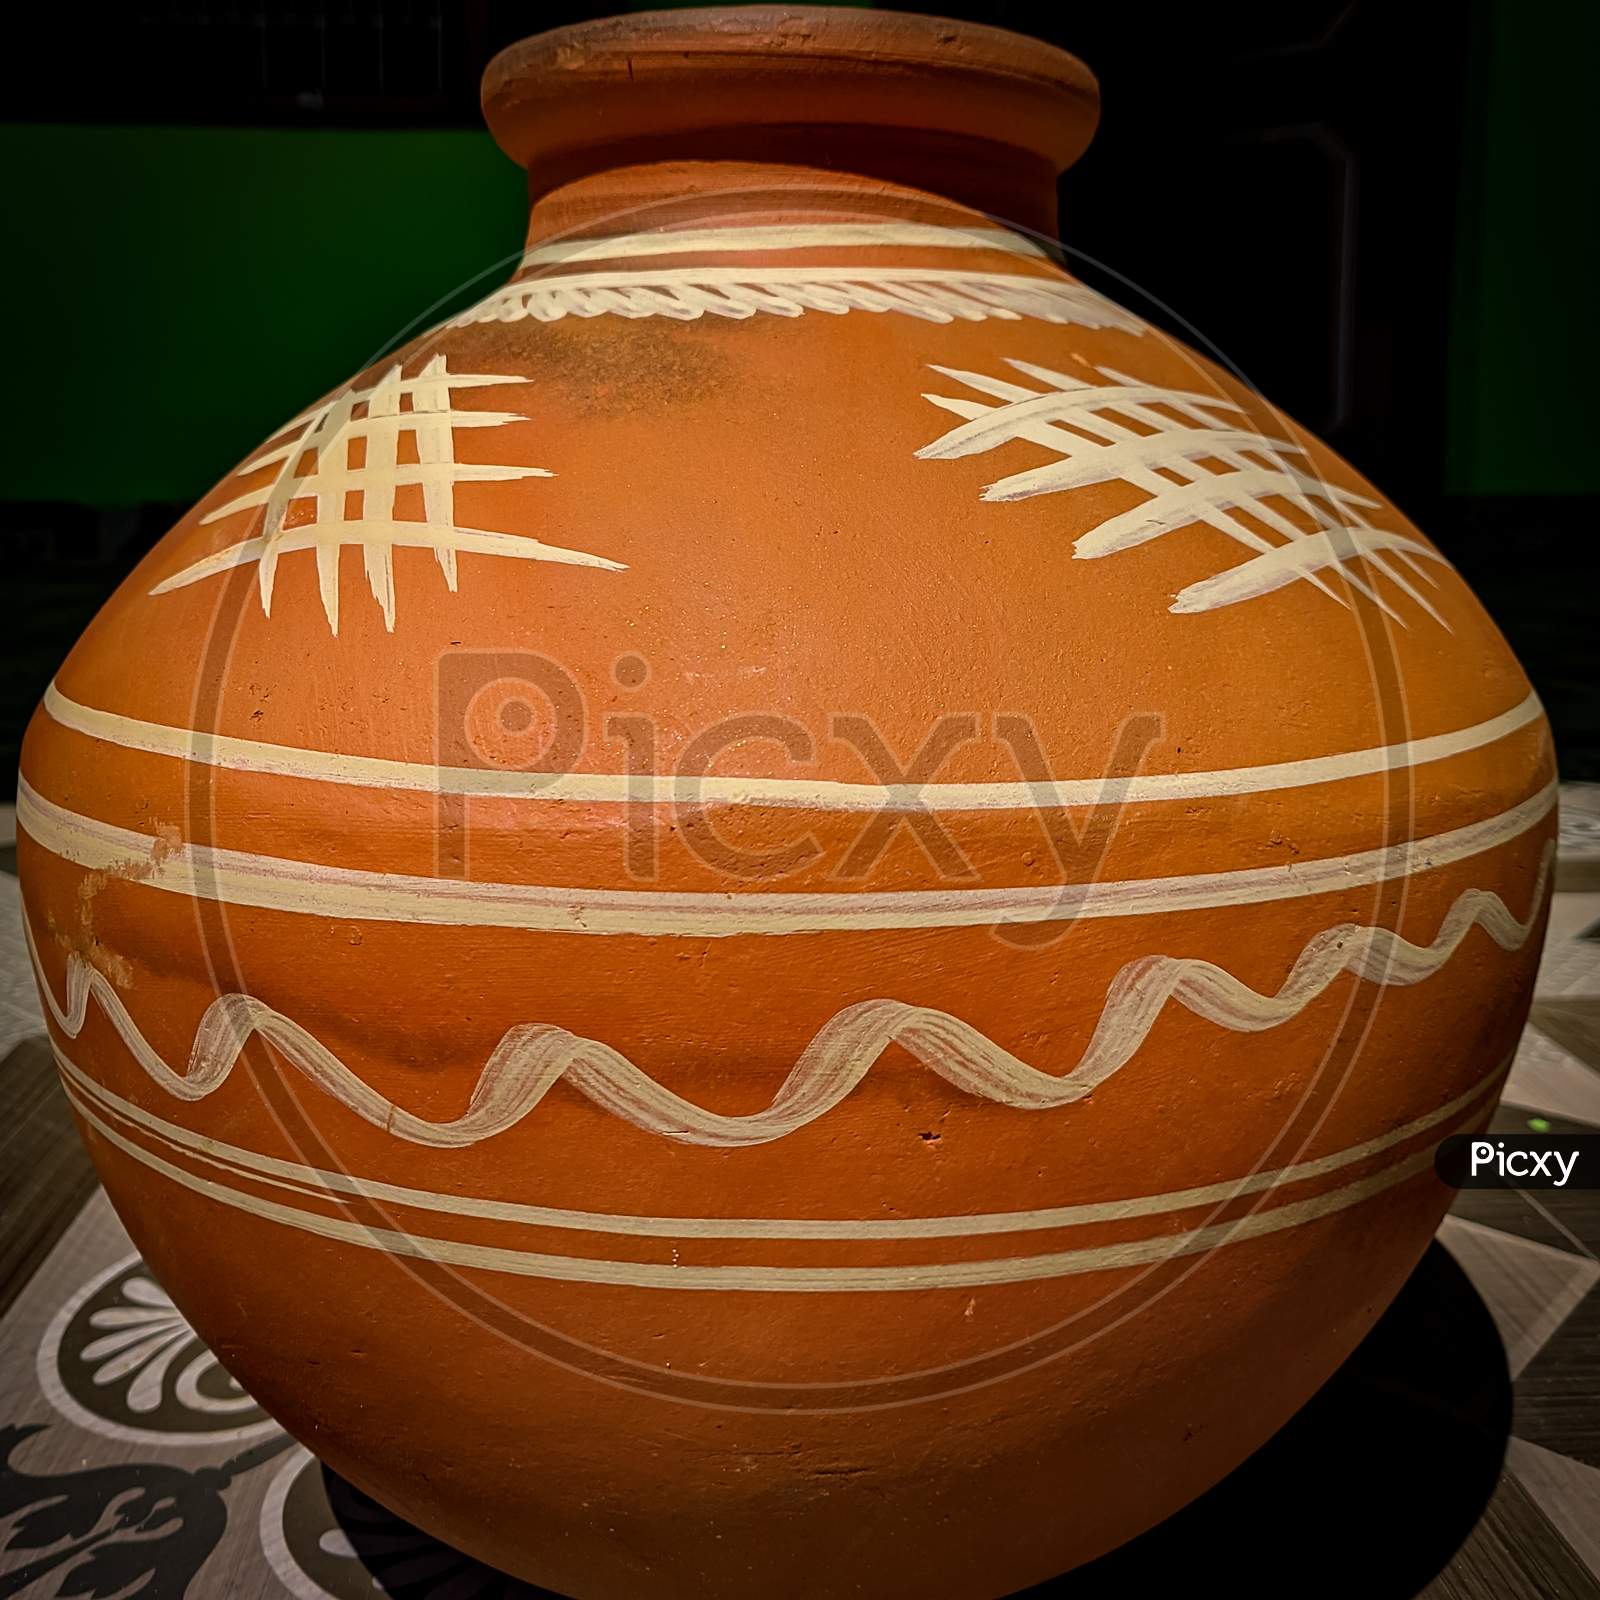 An Indian pitcher made with clay.